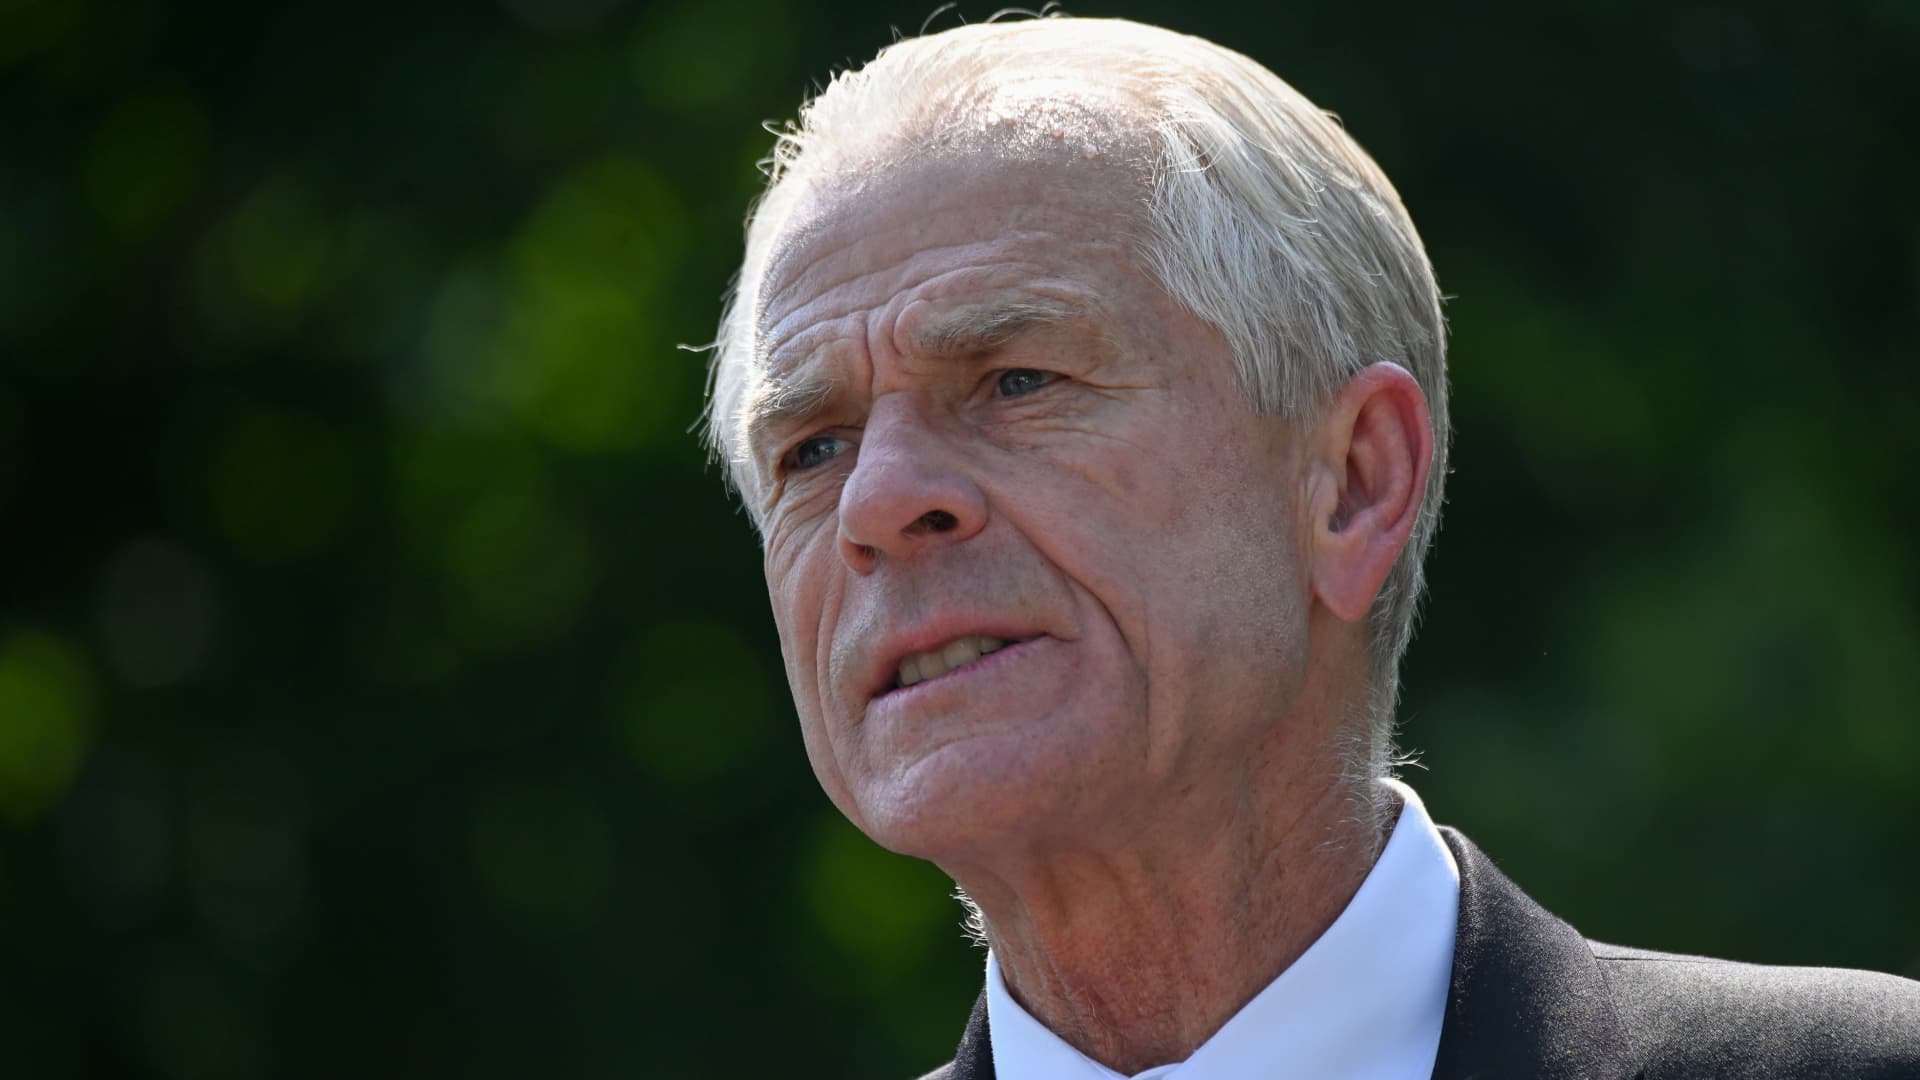 Former Trump aide Peter Navarro indicted for contempt of Congress in